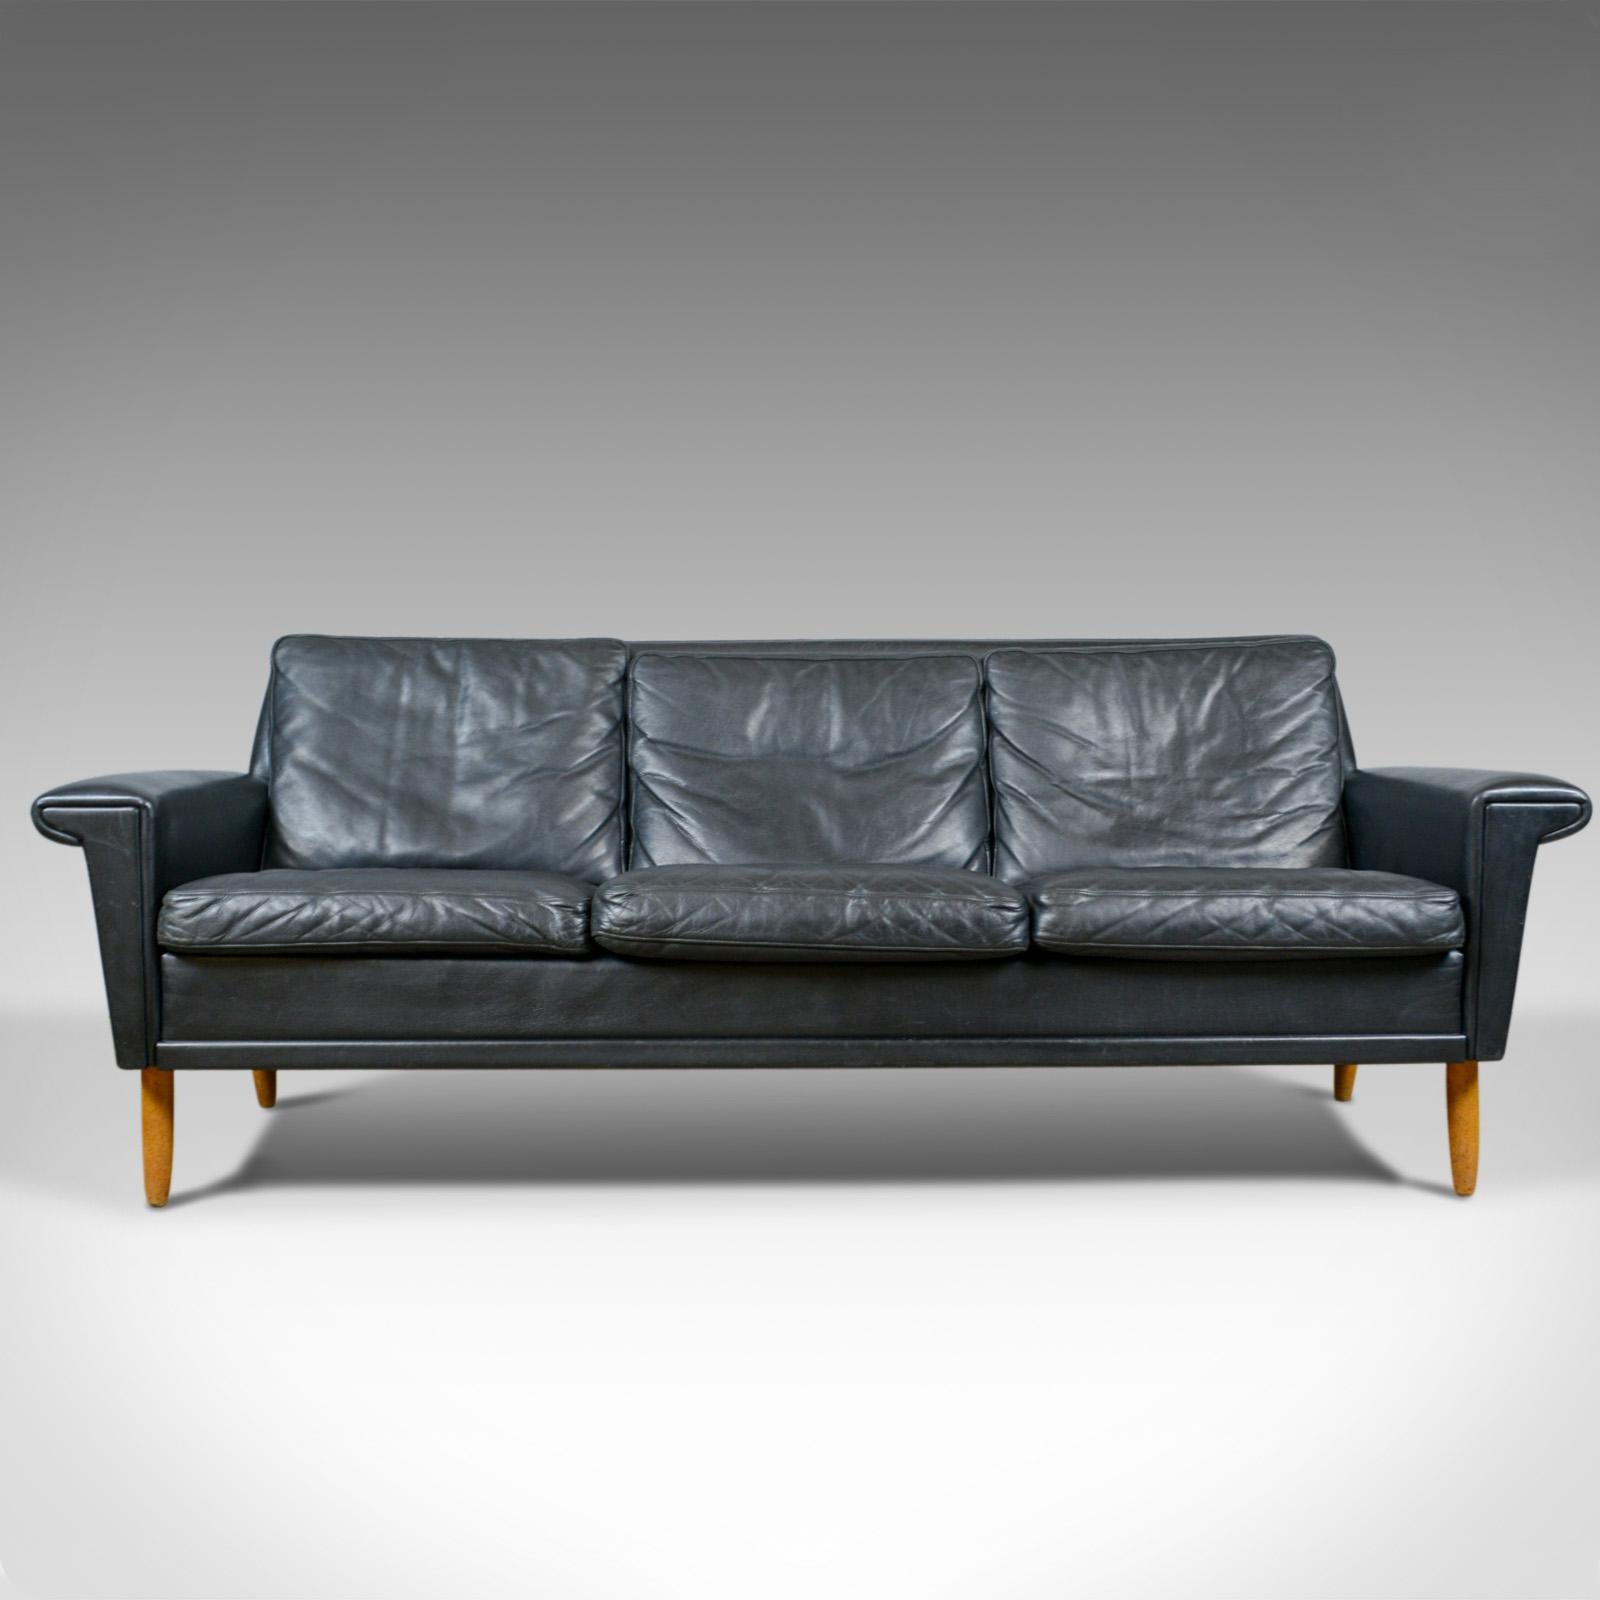 This is a vintage Mid-Century Modern black leather sofa. A Danish, three-seat sofa dating to the mid-20th century, circa 1970.

Classic Danish design with clean and simple lines
Finished a quality black leather
In good condition throughout